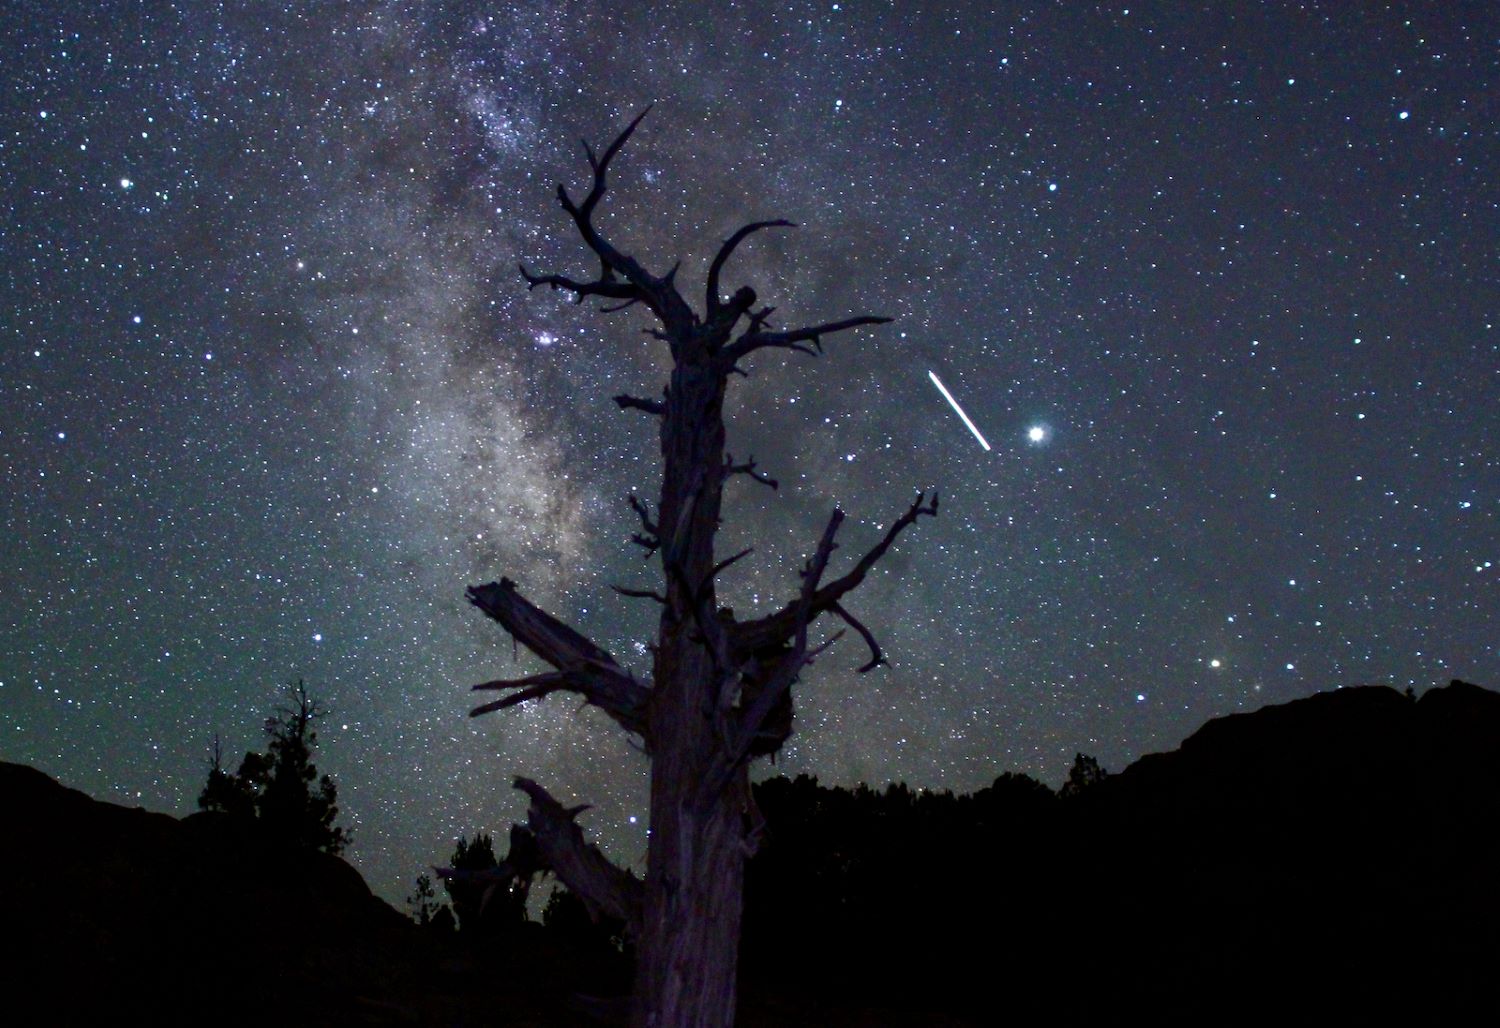 A streak of light in the sky, the ISS, moves behind a dark tree in the foreground.